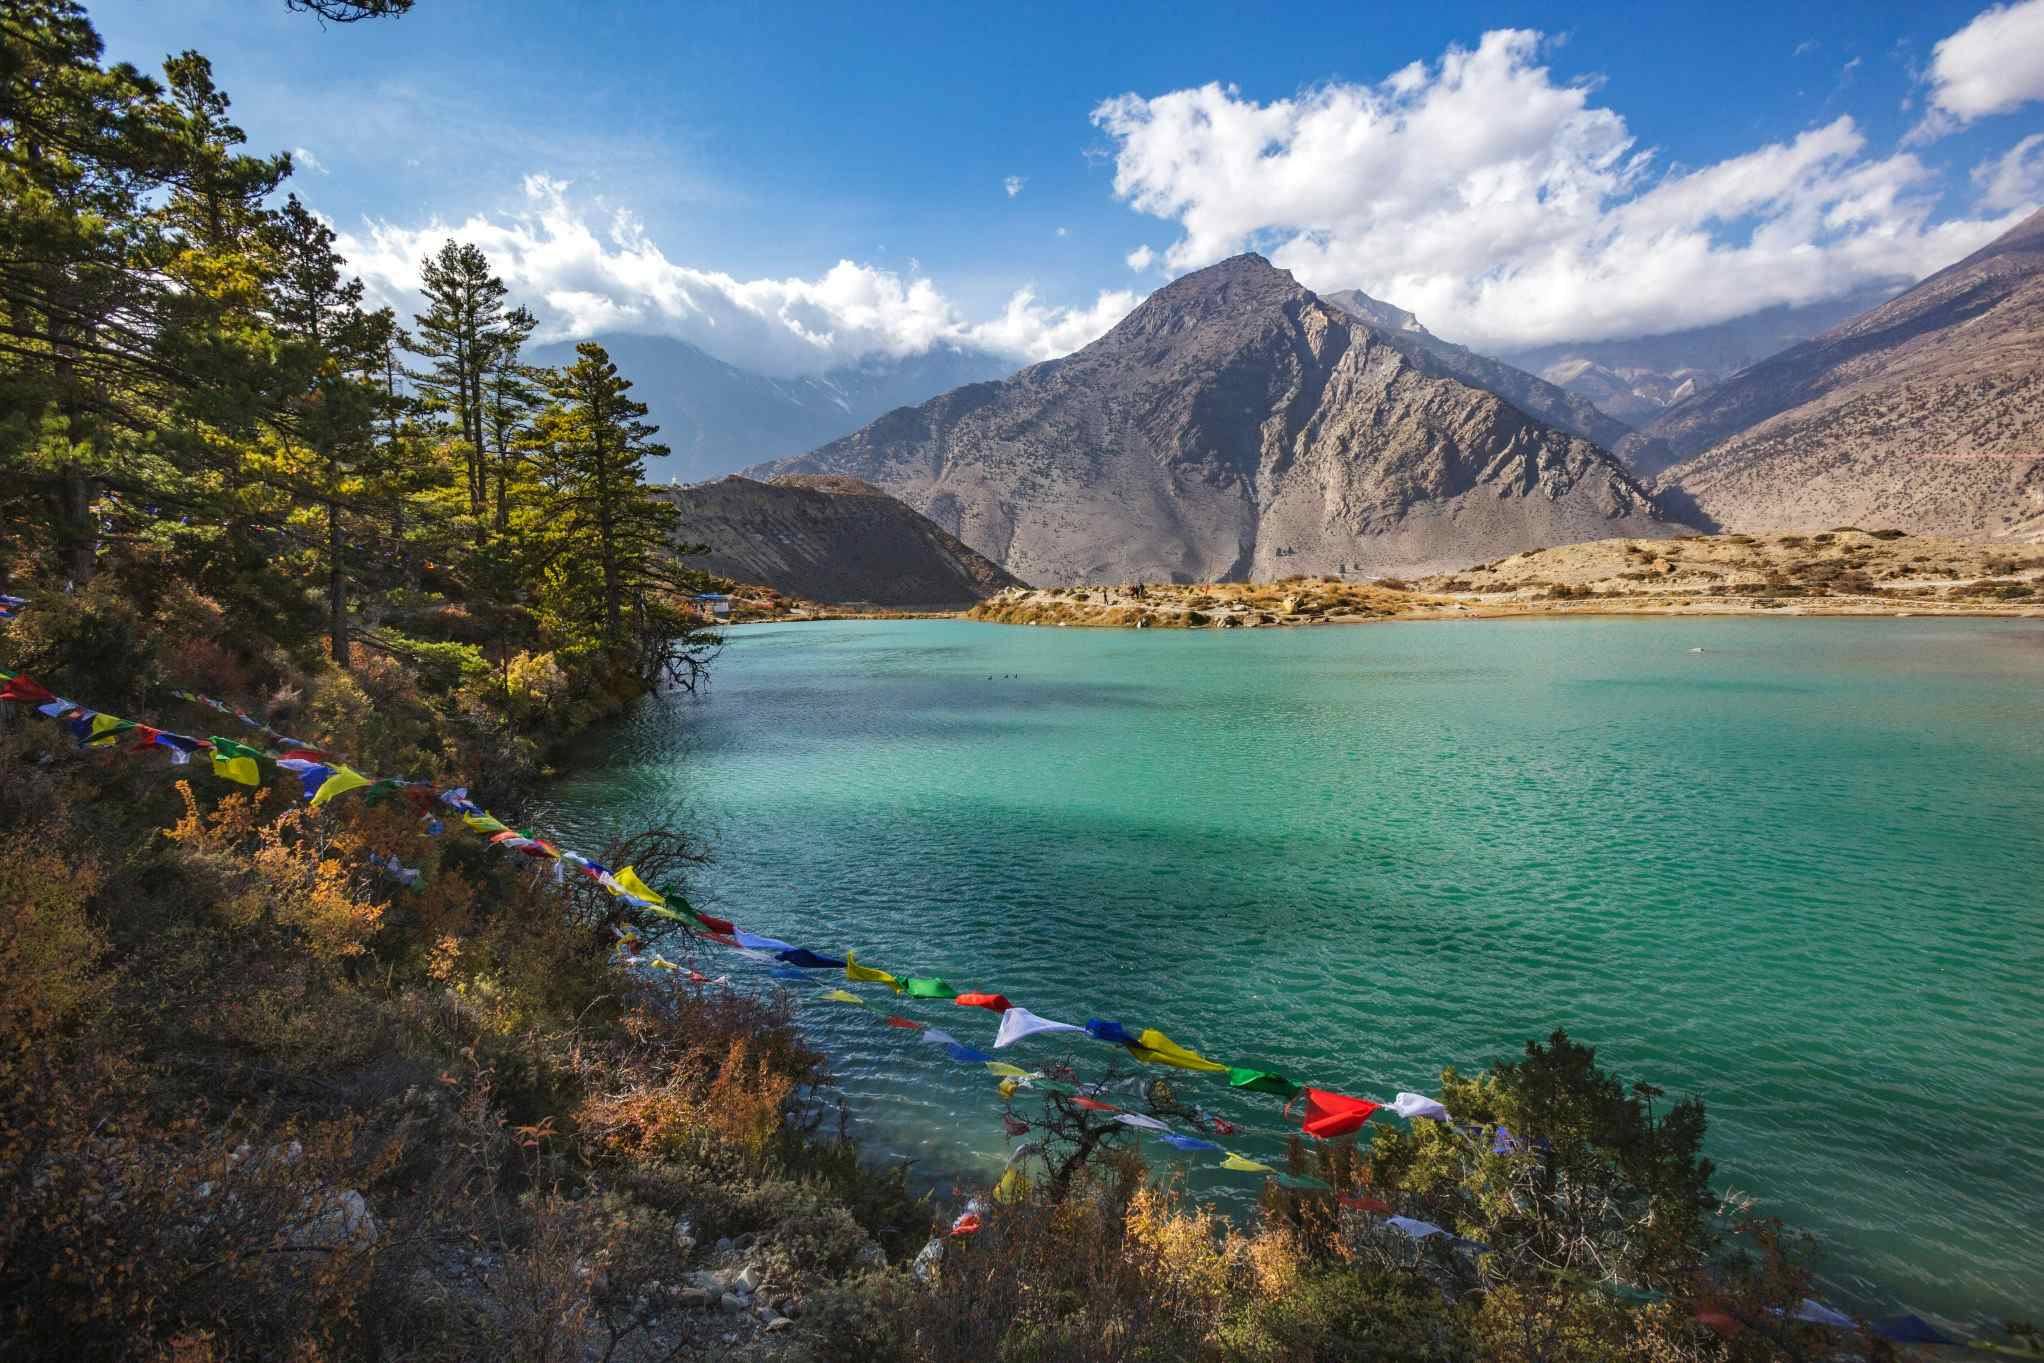 The turquoise waters of Dhumba Lake from Jomson, with prayer flags in the foreground, Nepal